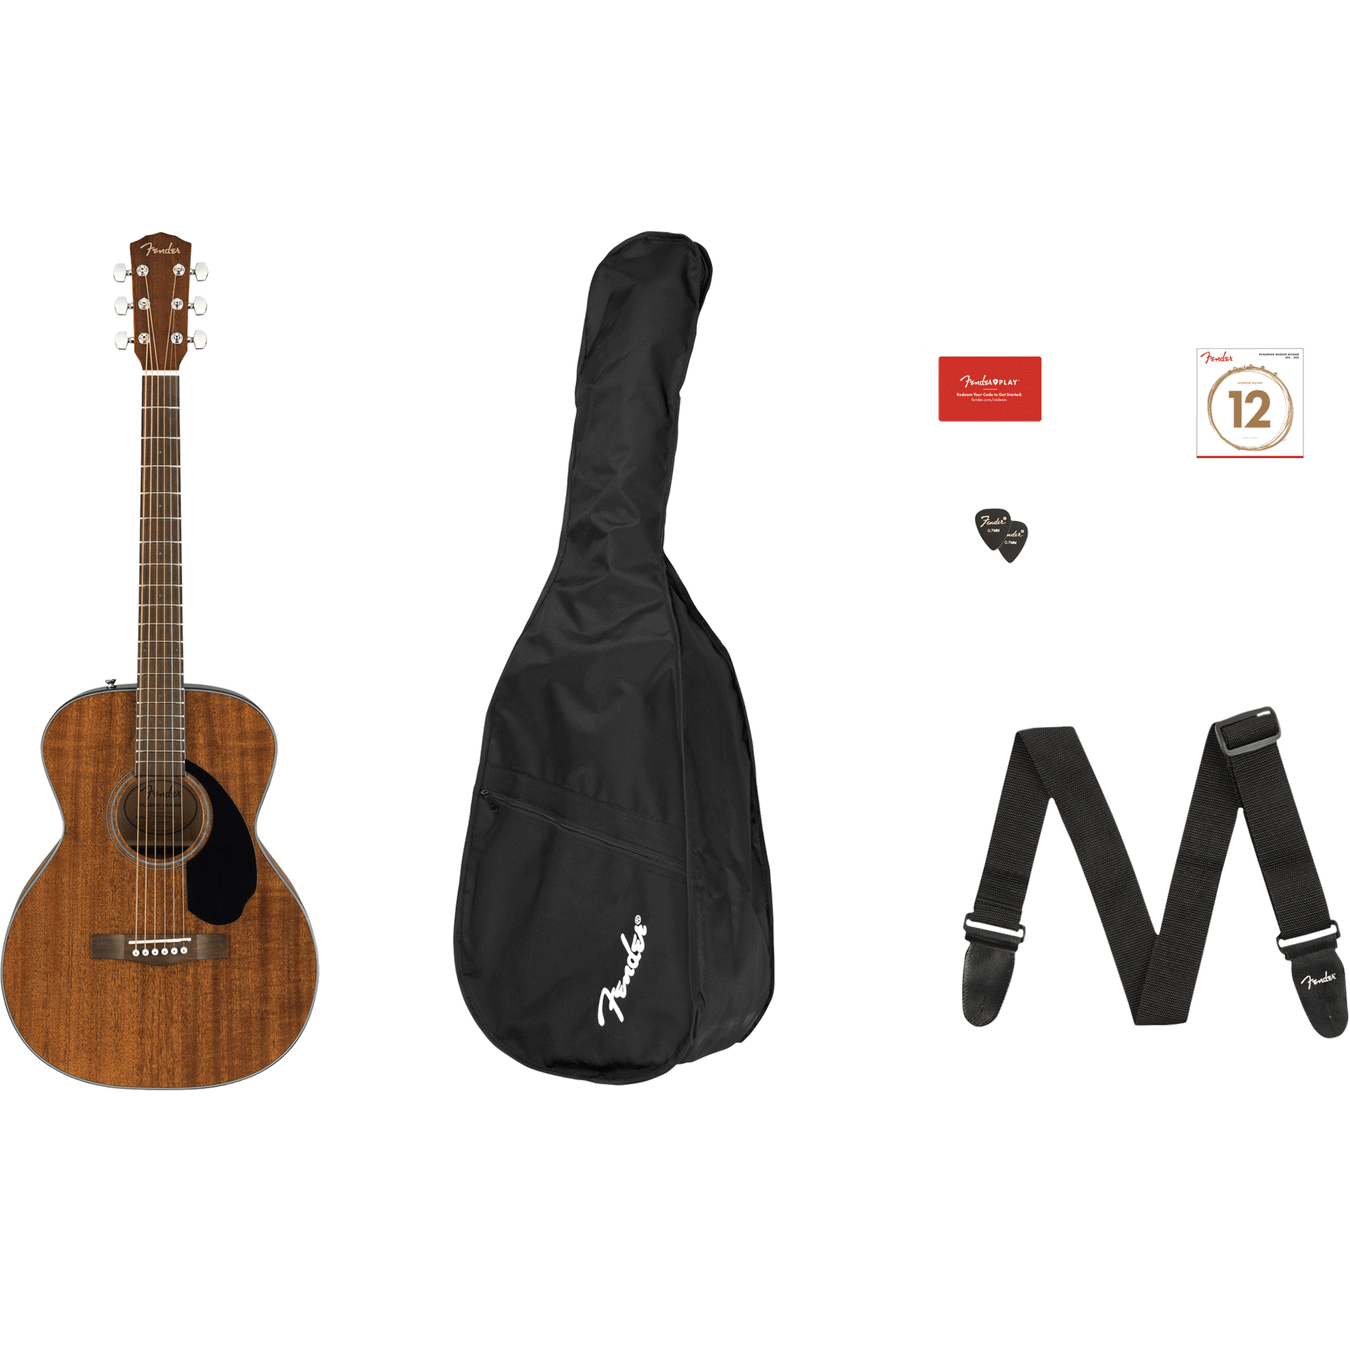 ELECTRIC/ACOUSTIC GUITAR TRACKS, MANY STYLES POP, ROCK, COUNTRY, BLUES,  ETC. for $125 : ArielDelgado 